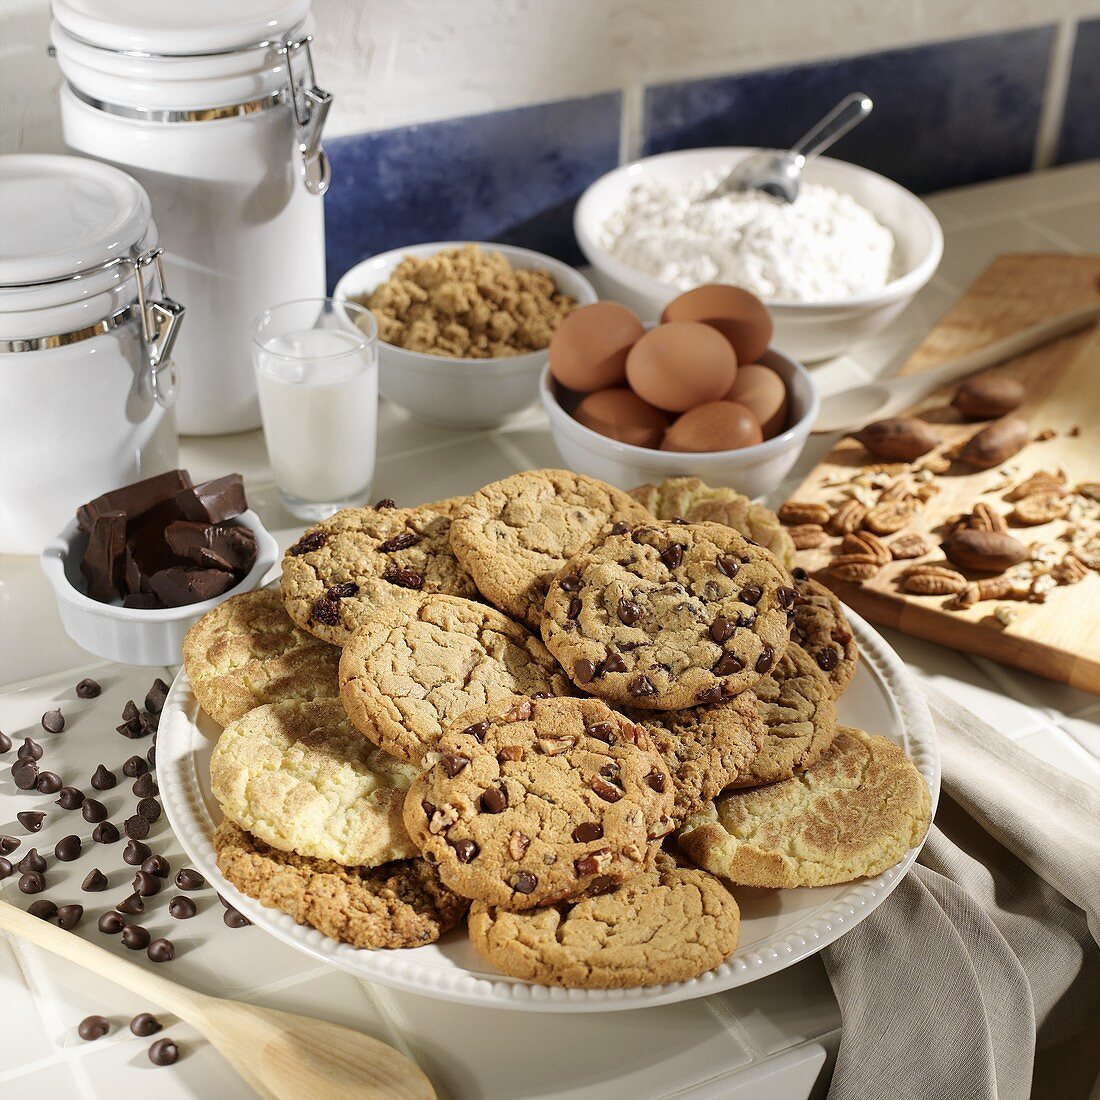 Assorted Homemade Cookies on a Platter with Baking Ingredients